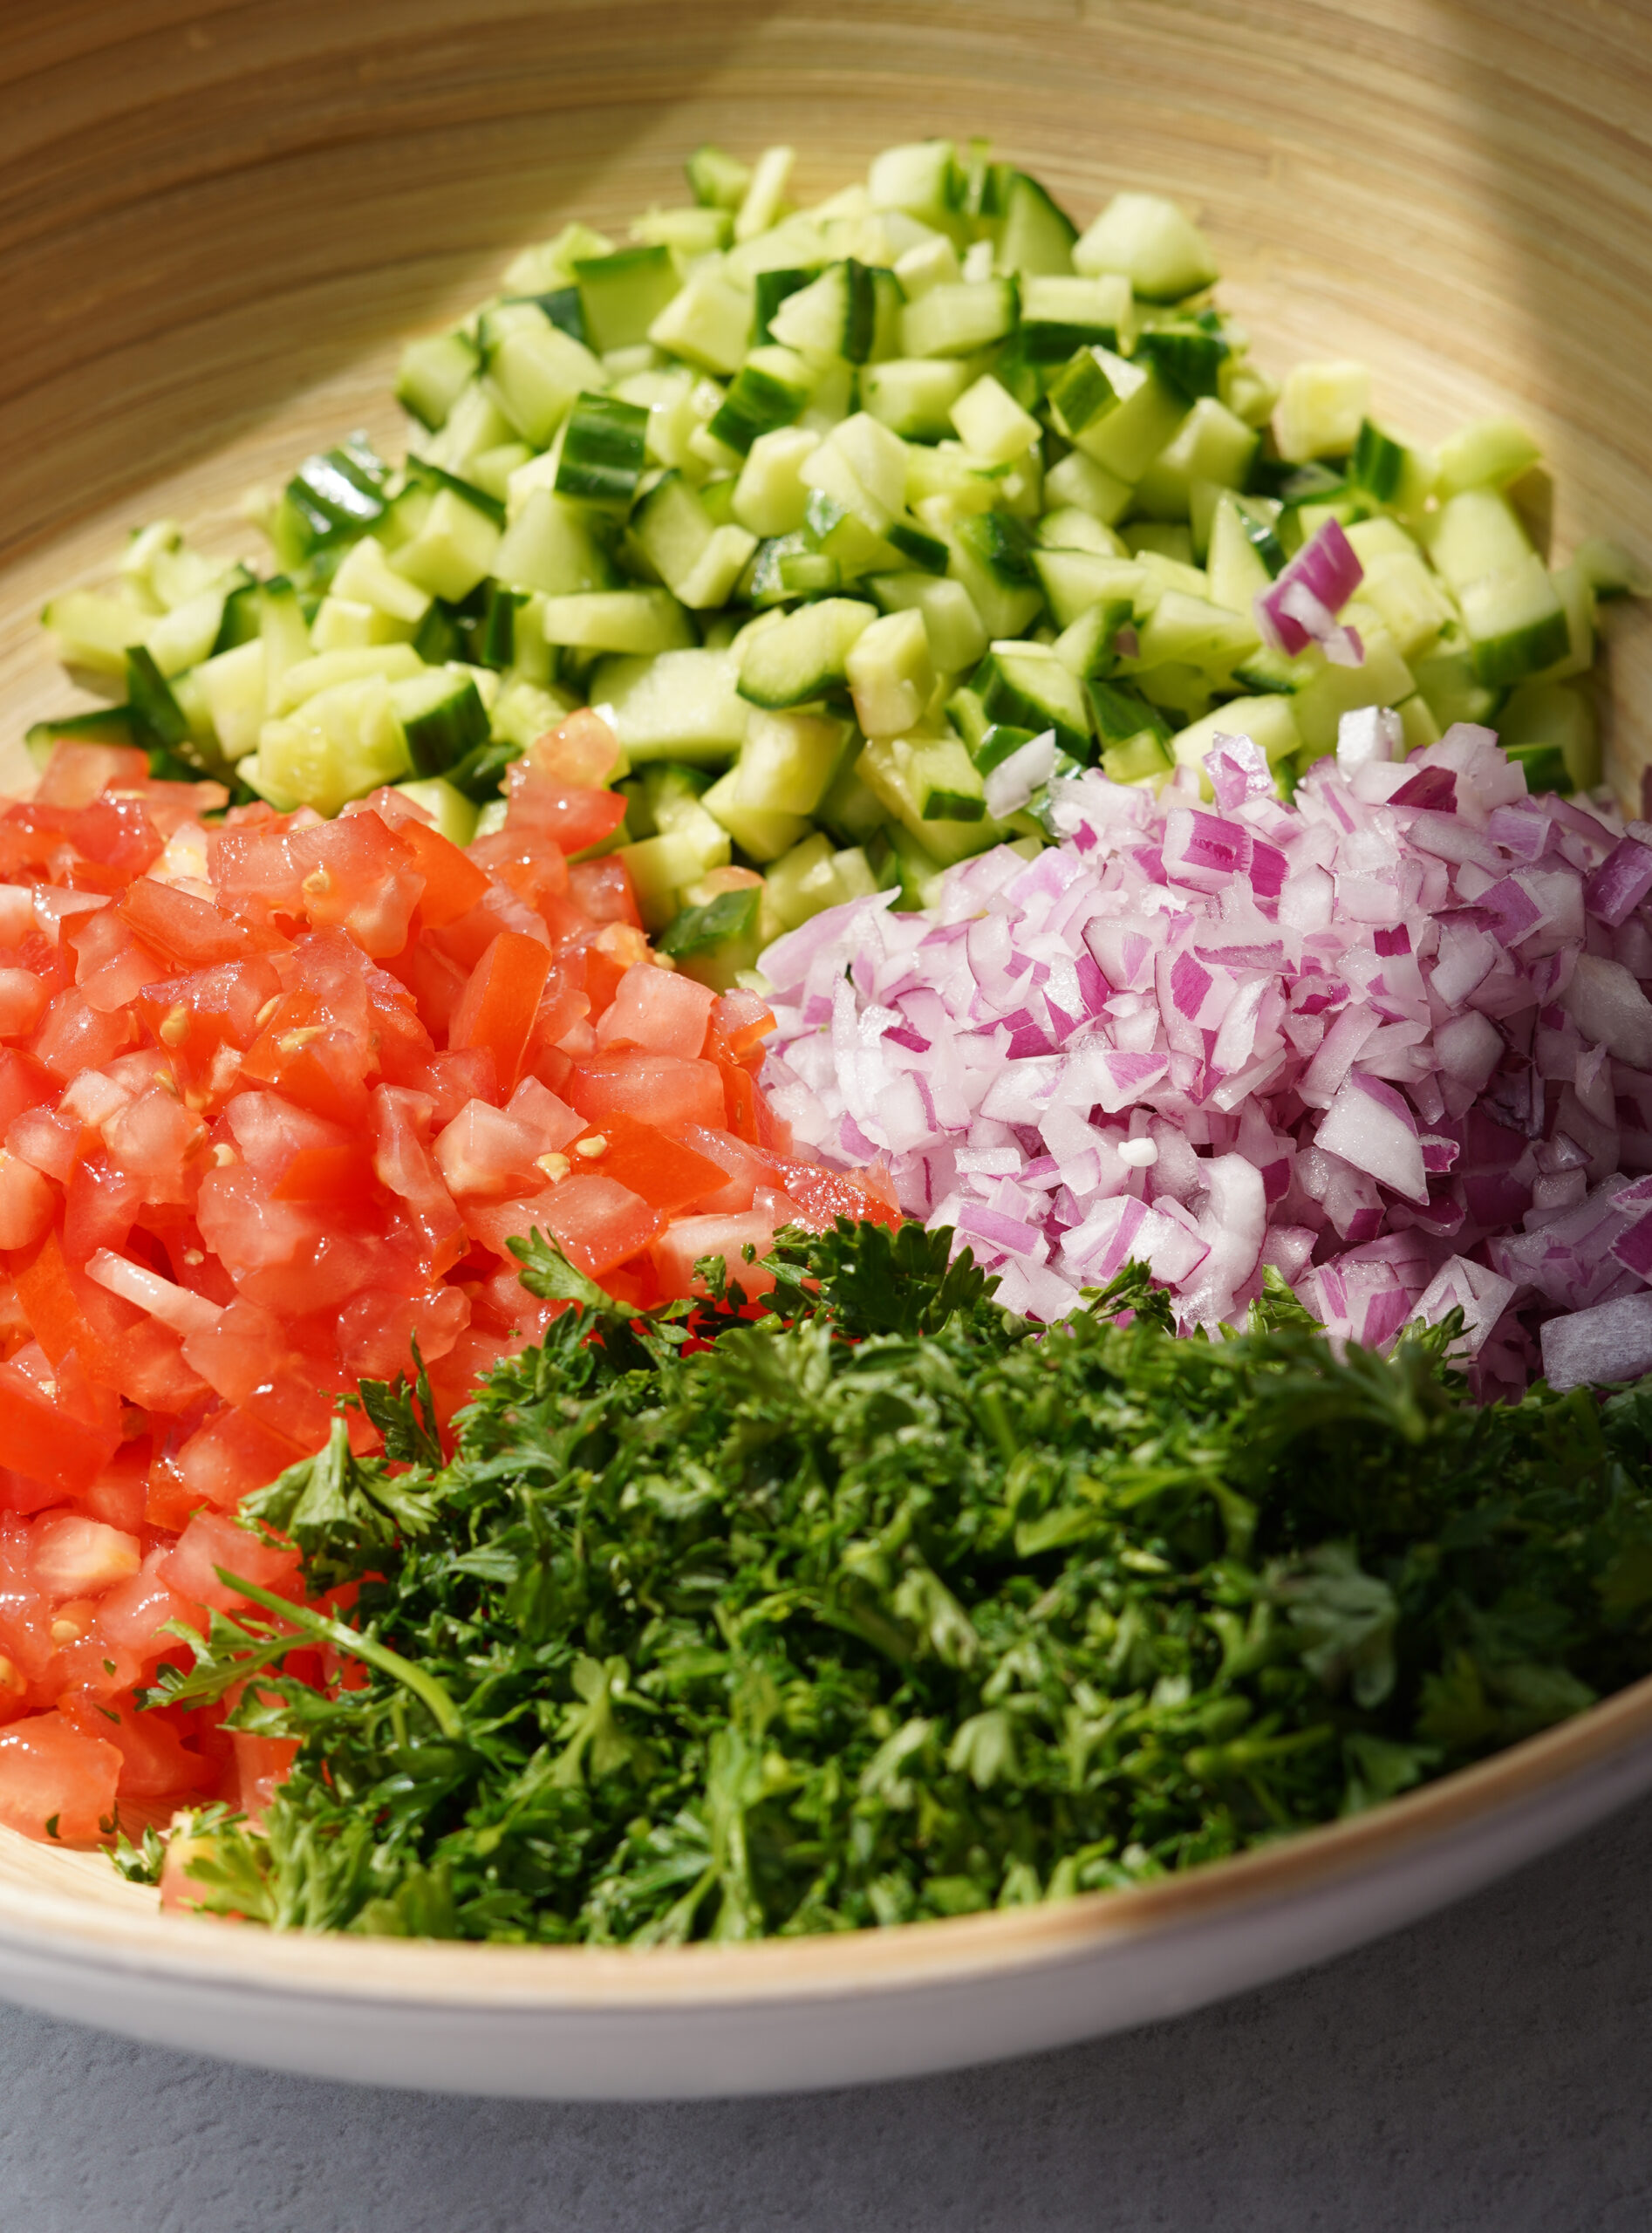 shirazi salad ingredients together in a mixing bowl